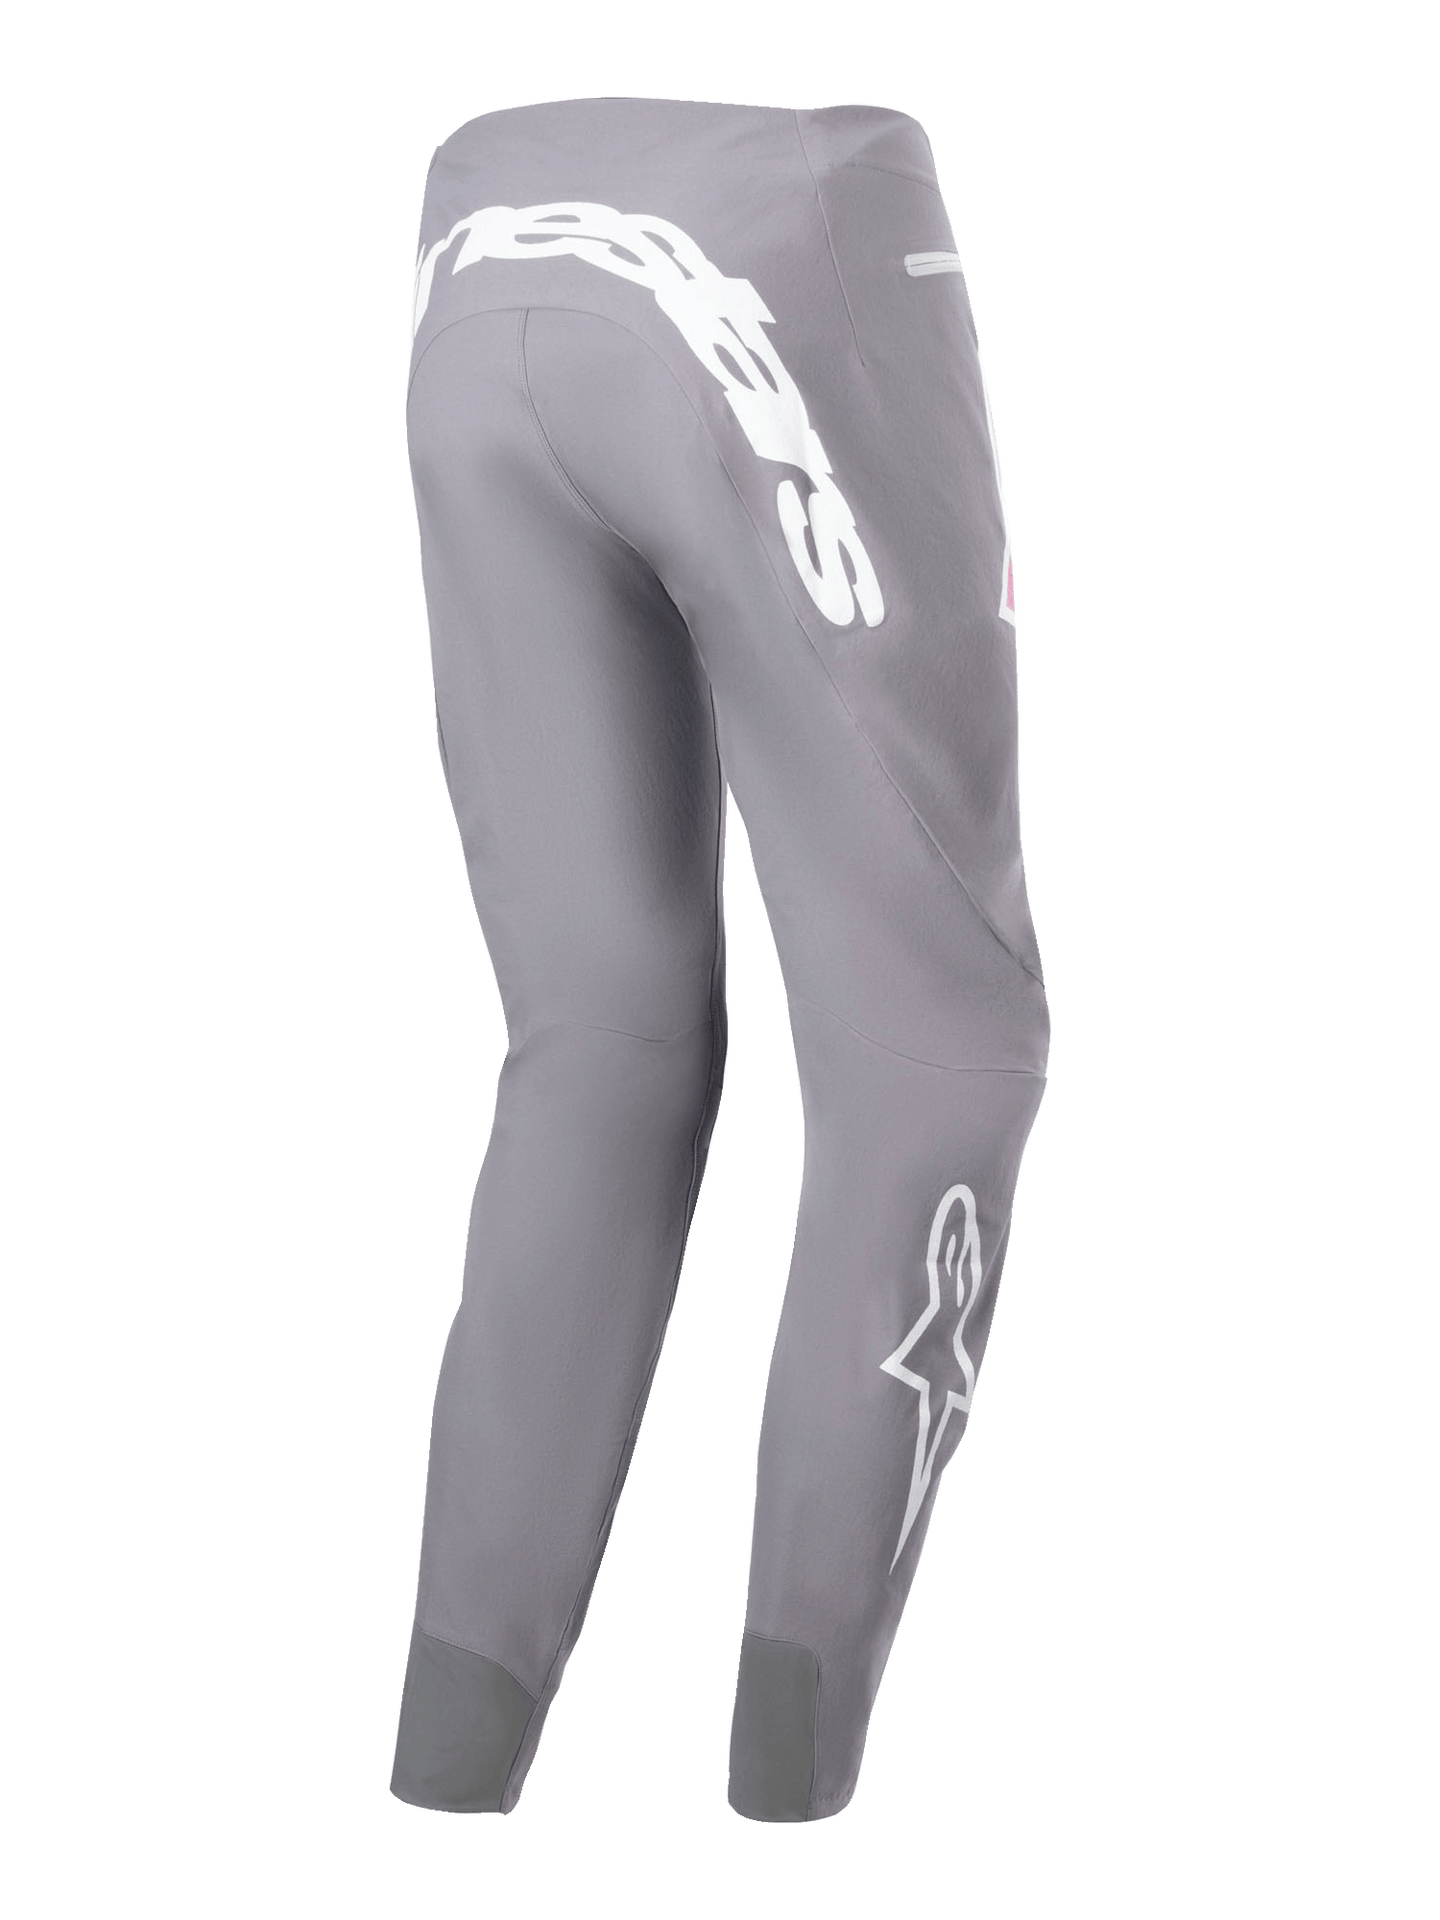 Cycling Pants | Alpinestars® Official Site